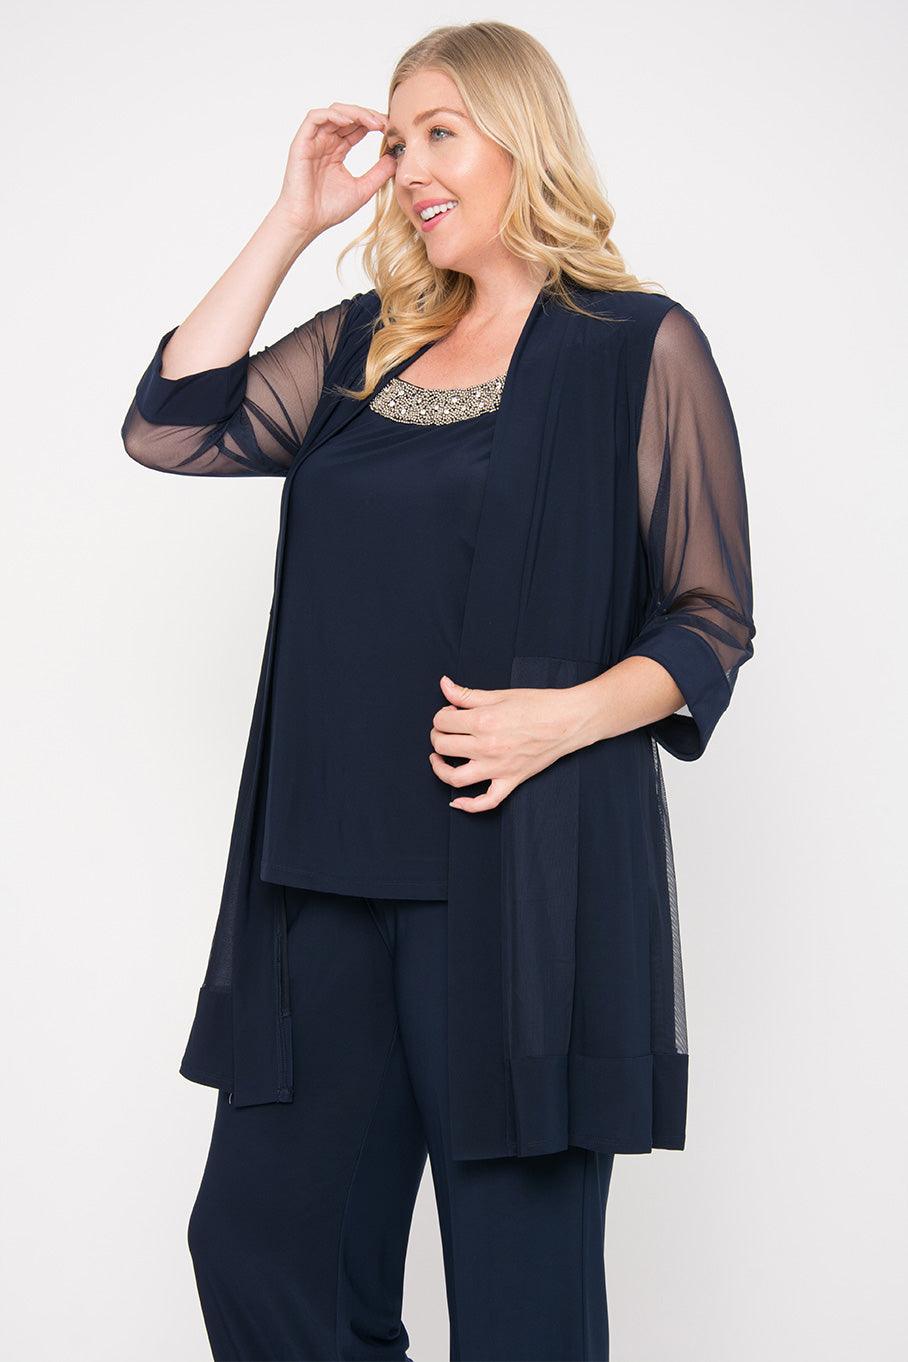 Plus Size Formal Trousers Shop - tundraecology.hi.is 1694325913